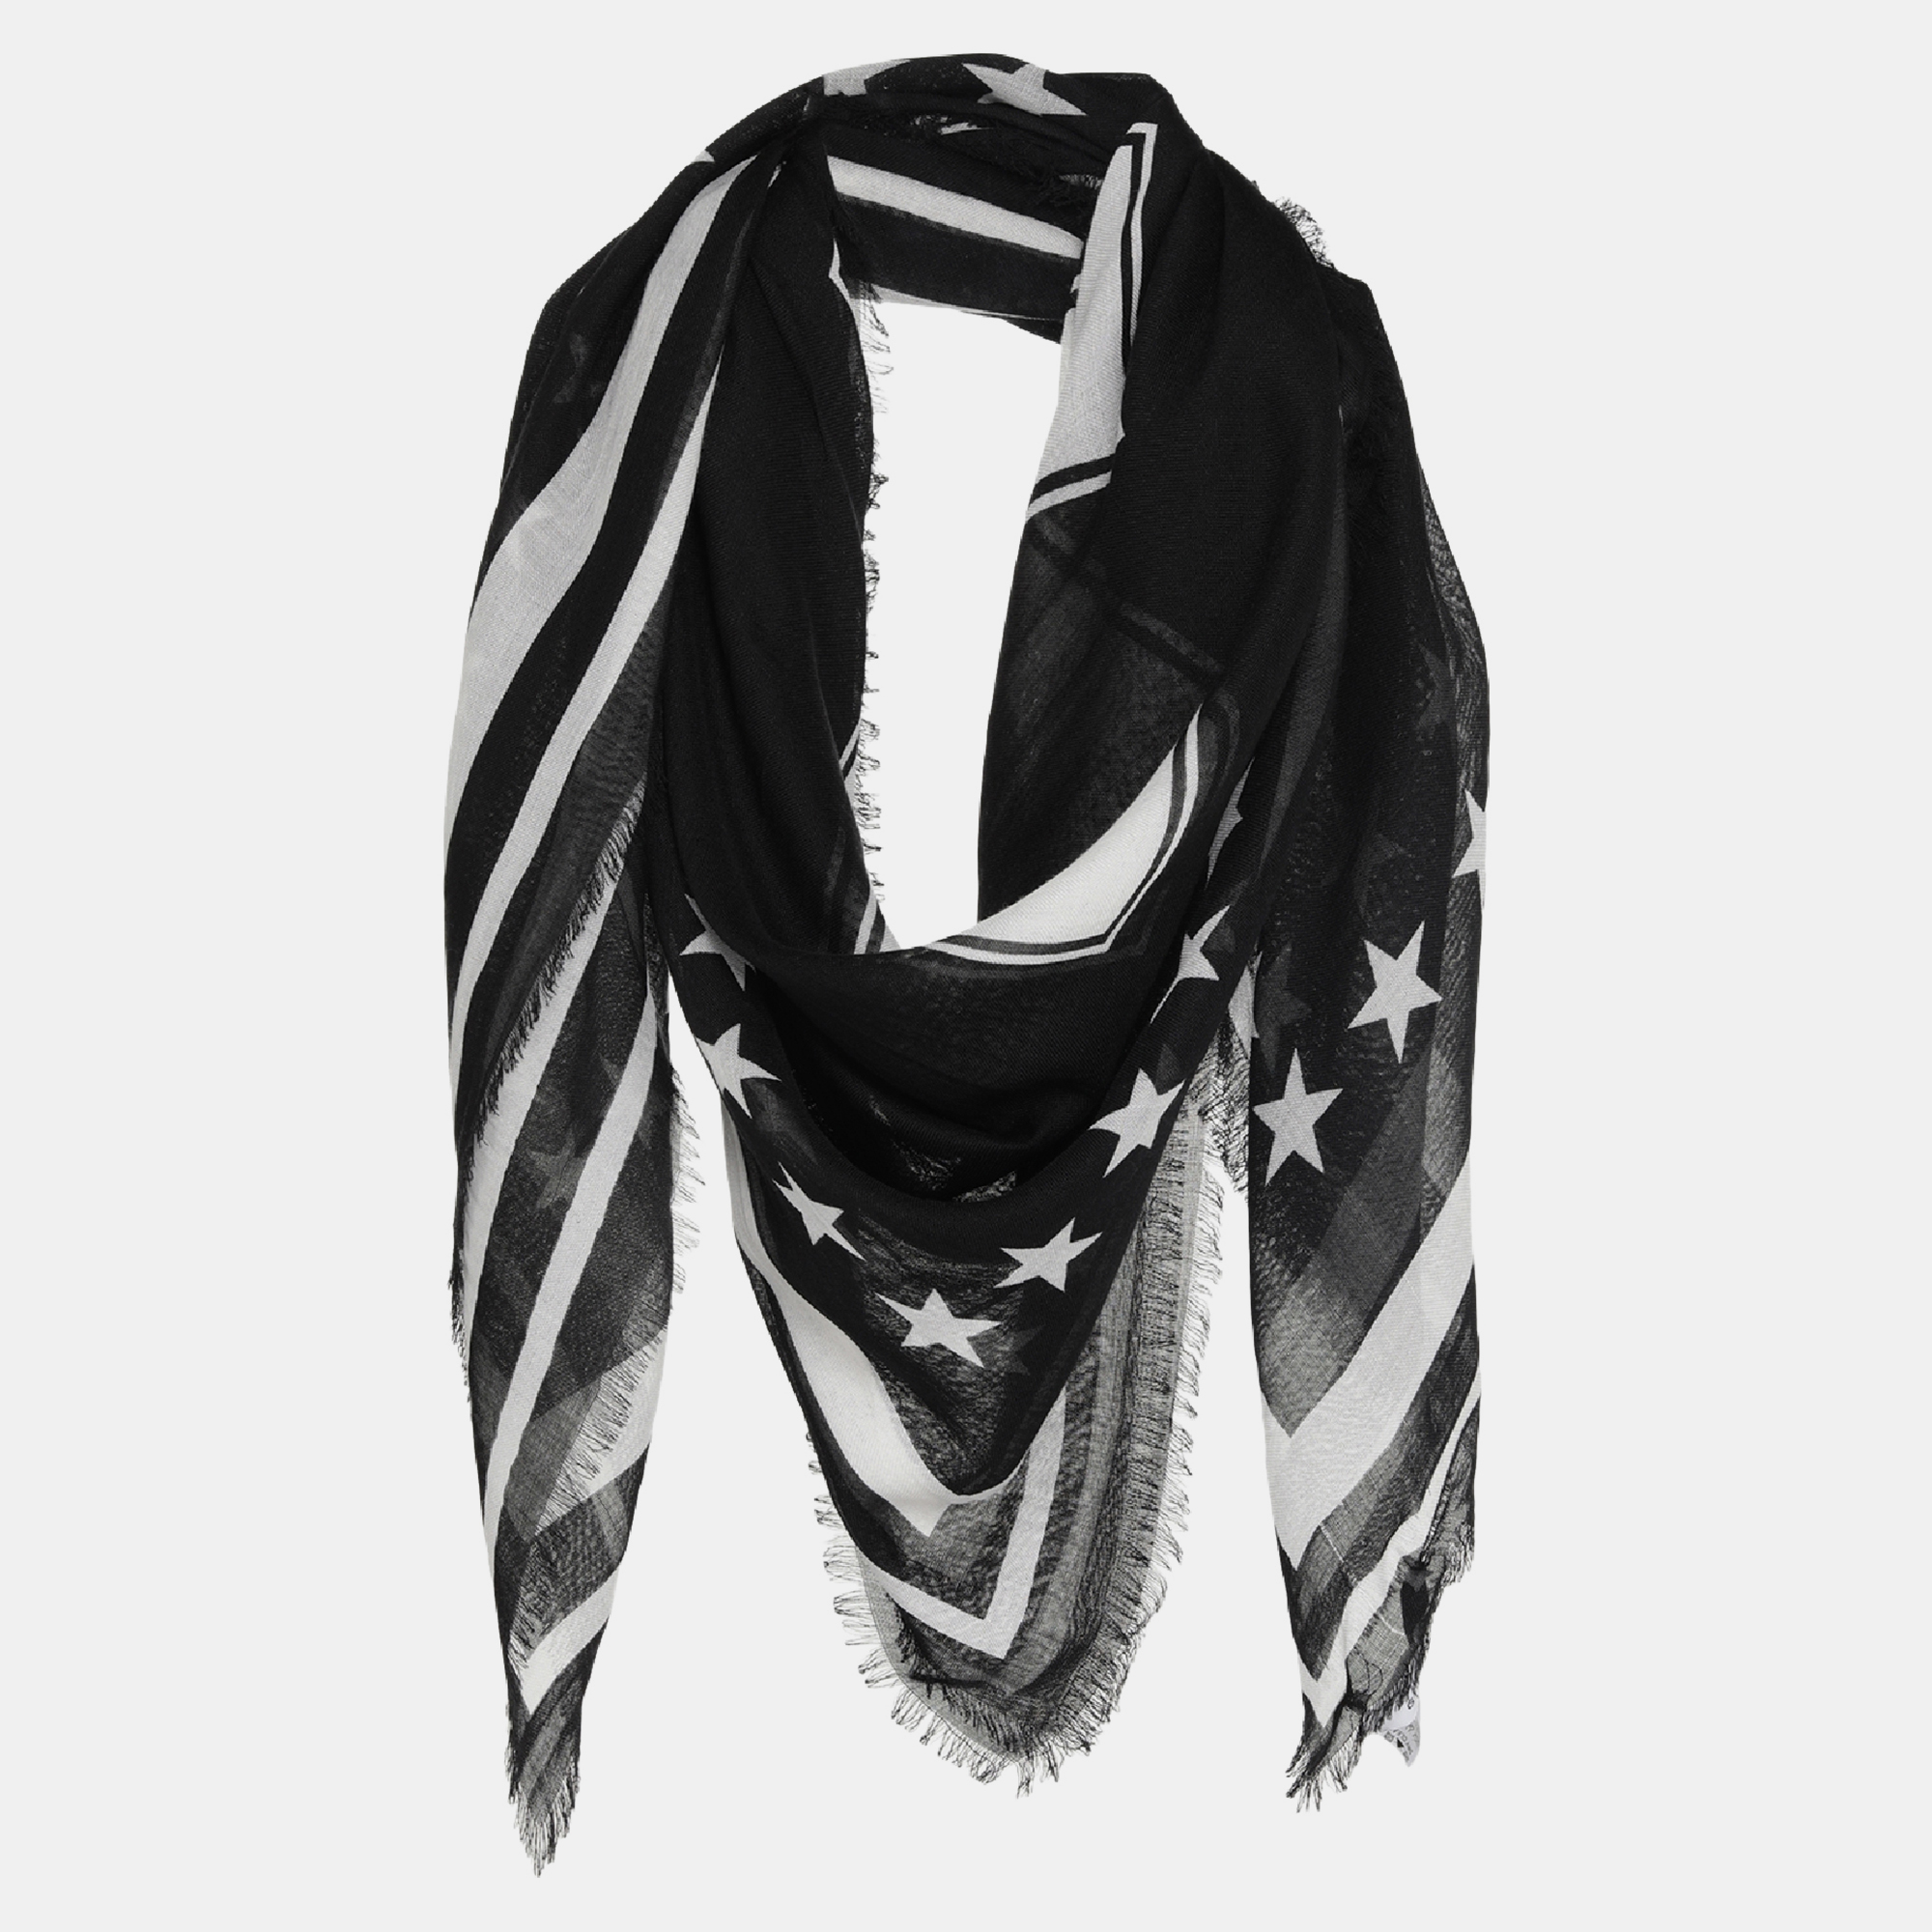 Givenchy two-tone cashmere scarf